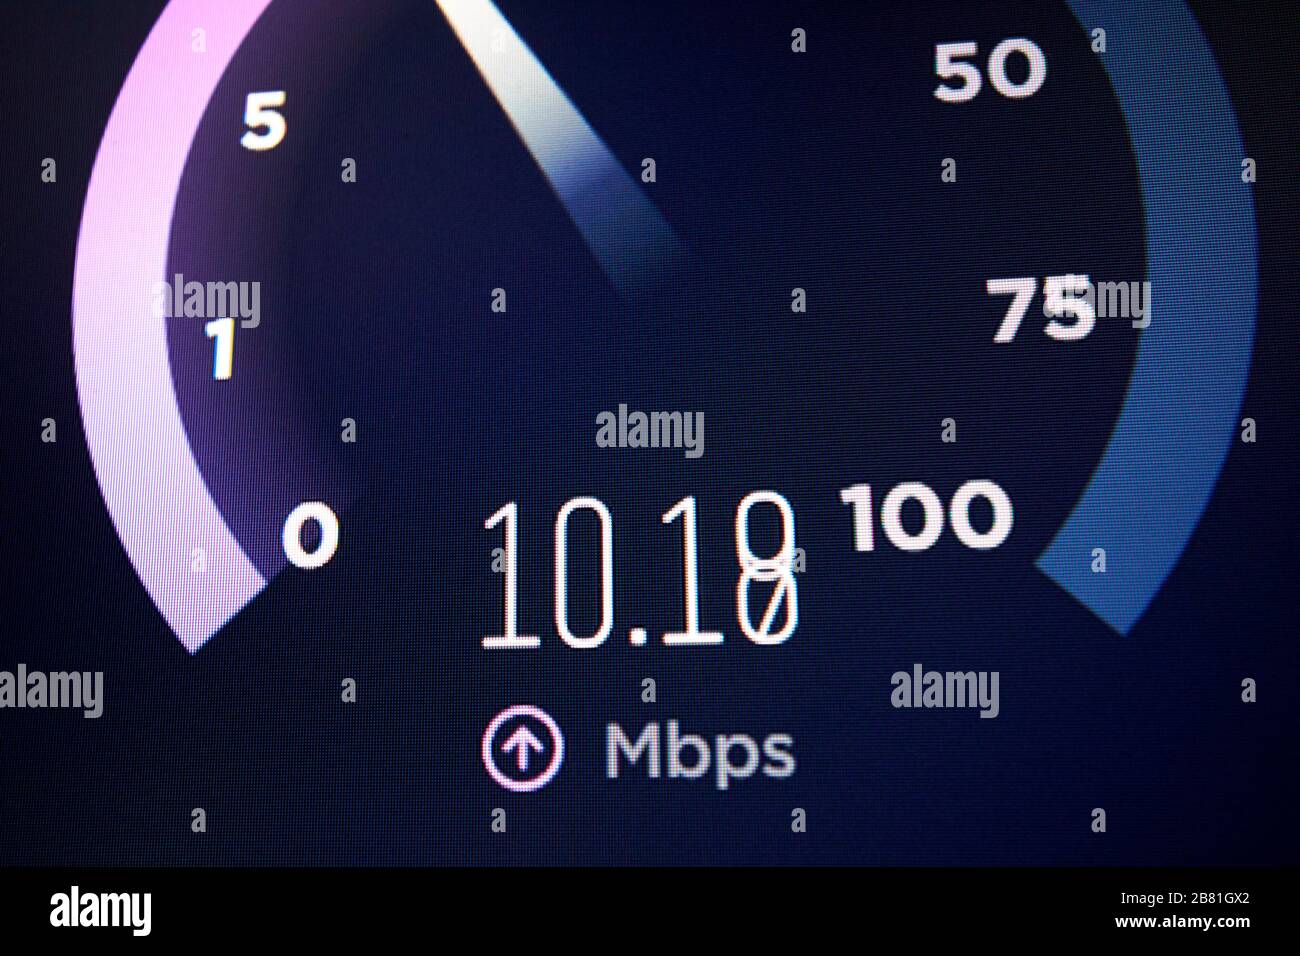 screen display of fast broadband upload  internet speed in excess of 10Mbps using speedtest online virgin media access Stock Photo